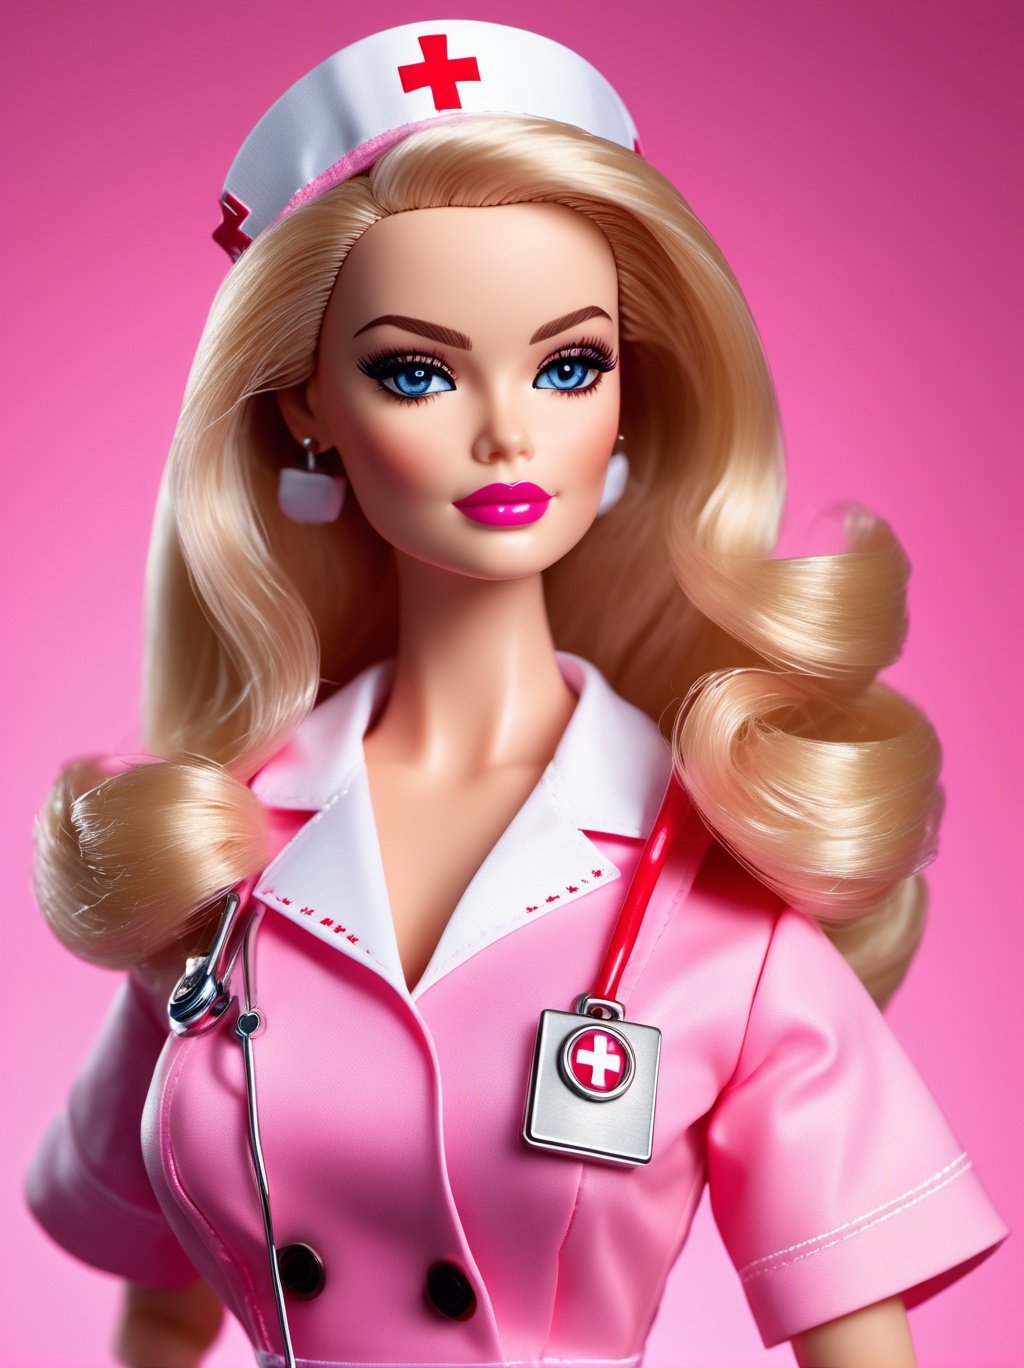 Ultra high resolution, high resolution, (masterpiece: 1.4), hyper-detail, 1girl, inboxDollPlaySetQuiron style, full body, no humans, doll, toy, barbie, in a gift box, character print, blonde hair, middle length hair, blight blue eyes, (((wearing a detailed pink theme nurse outfit and matching accessories:1.5))), pink sparkles, sprinkles, barbie pink color theme, beautiful female barbie, full lips, parted_lips, heavy make-up, smoky eyes, detailed eyes, pretty face,3DMM,inboxDollPlaySetQuiron style,(margot robbie),<lyco:sdxl1_quiron_inboxDollPlaySet_v3_lycoris:0.97>